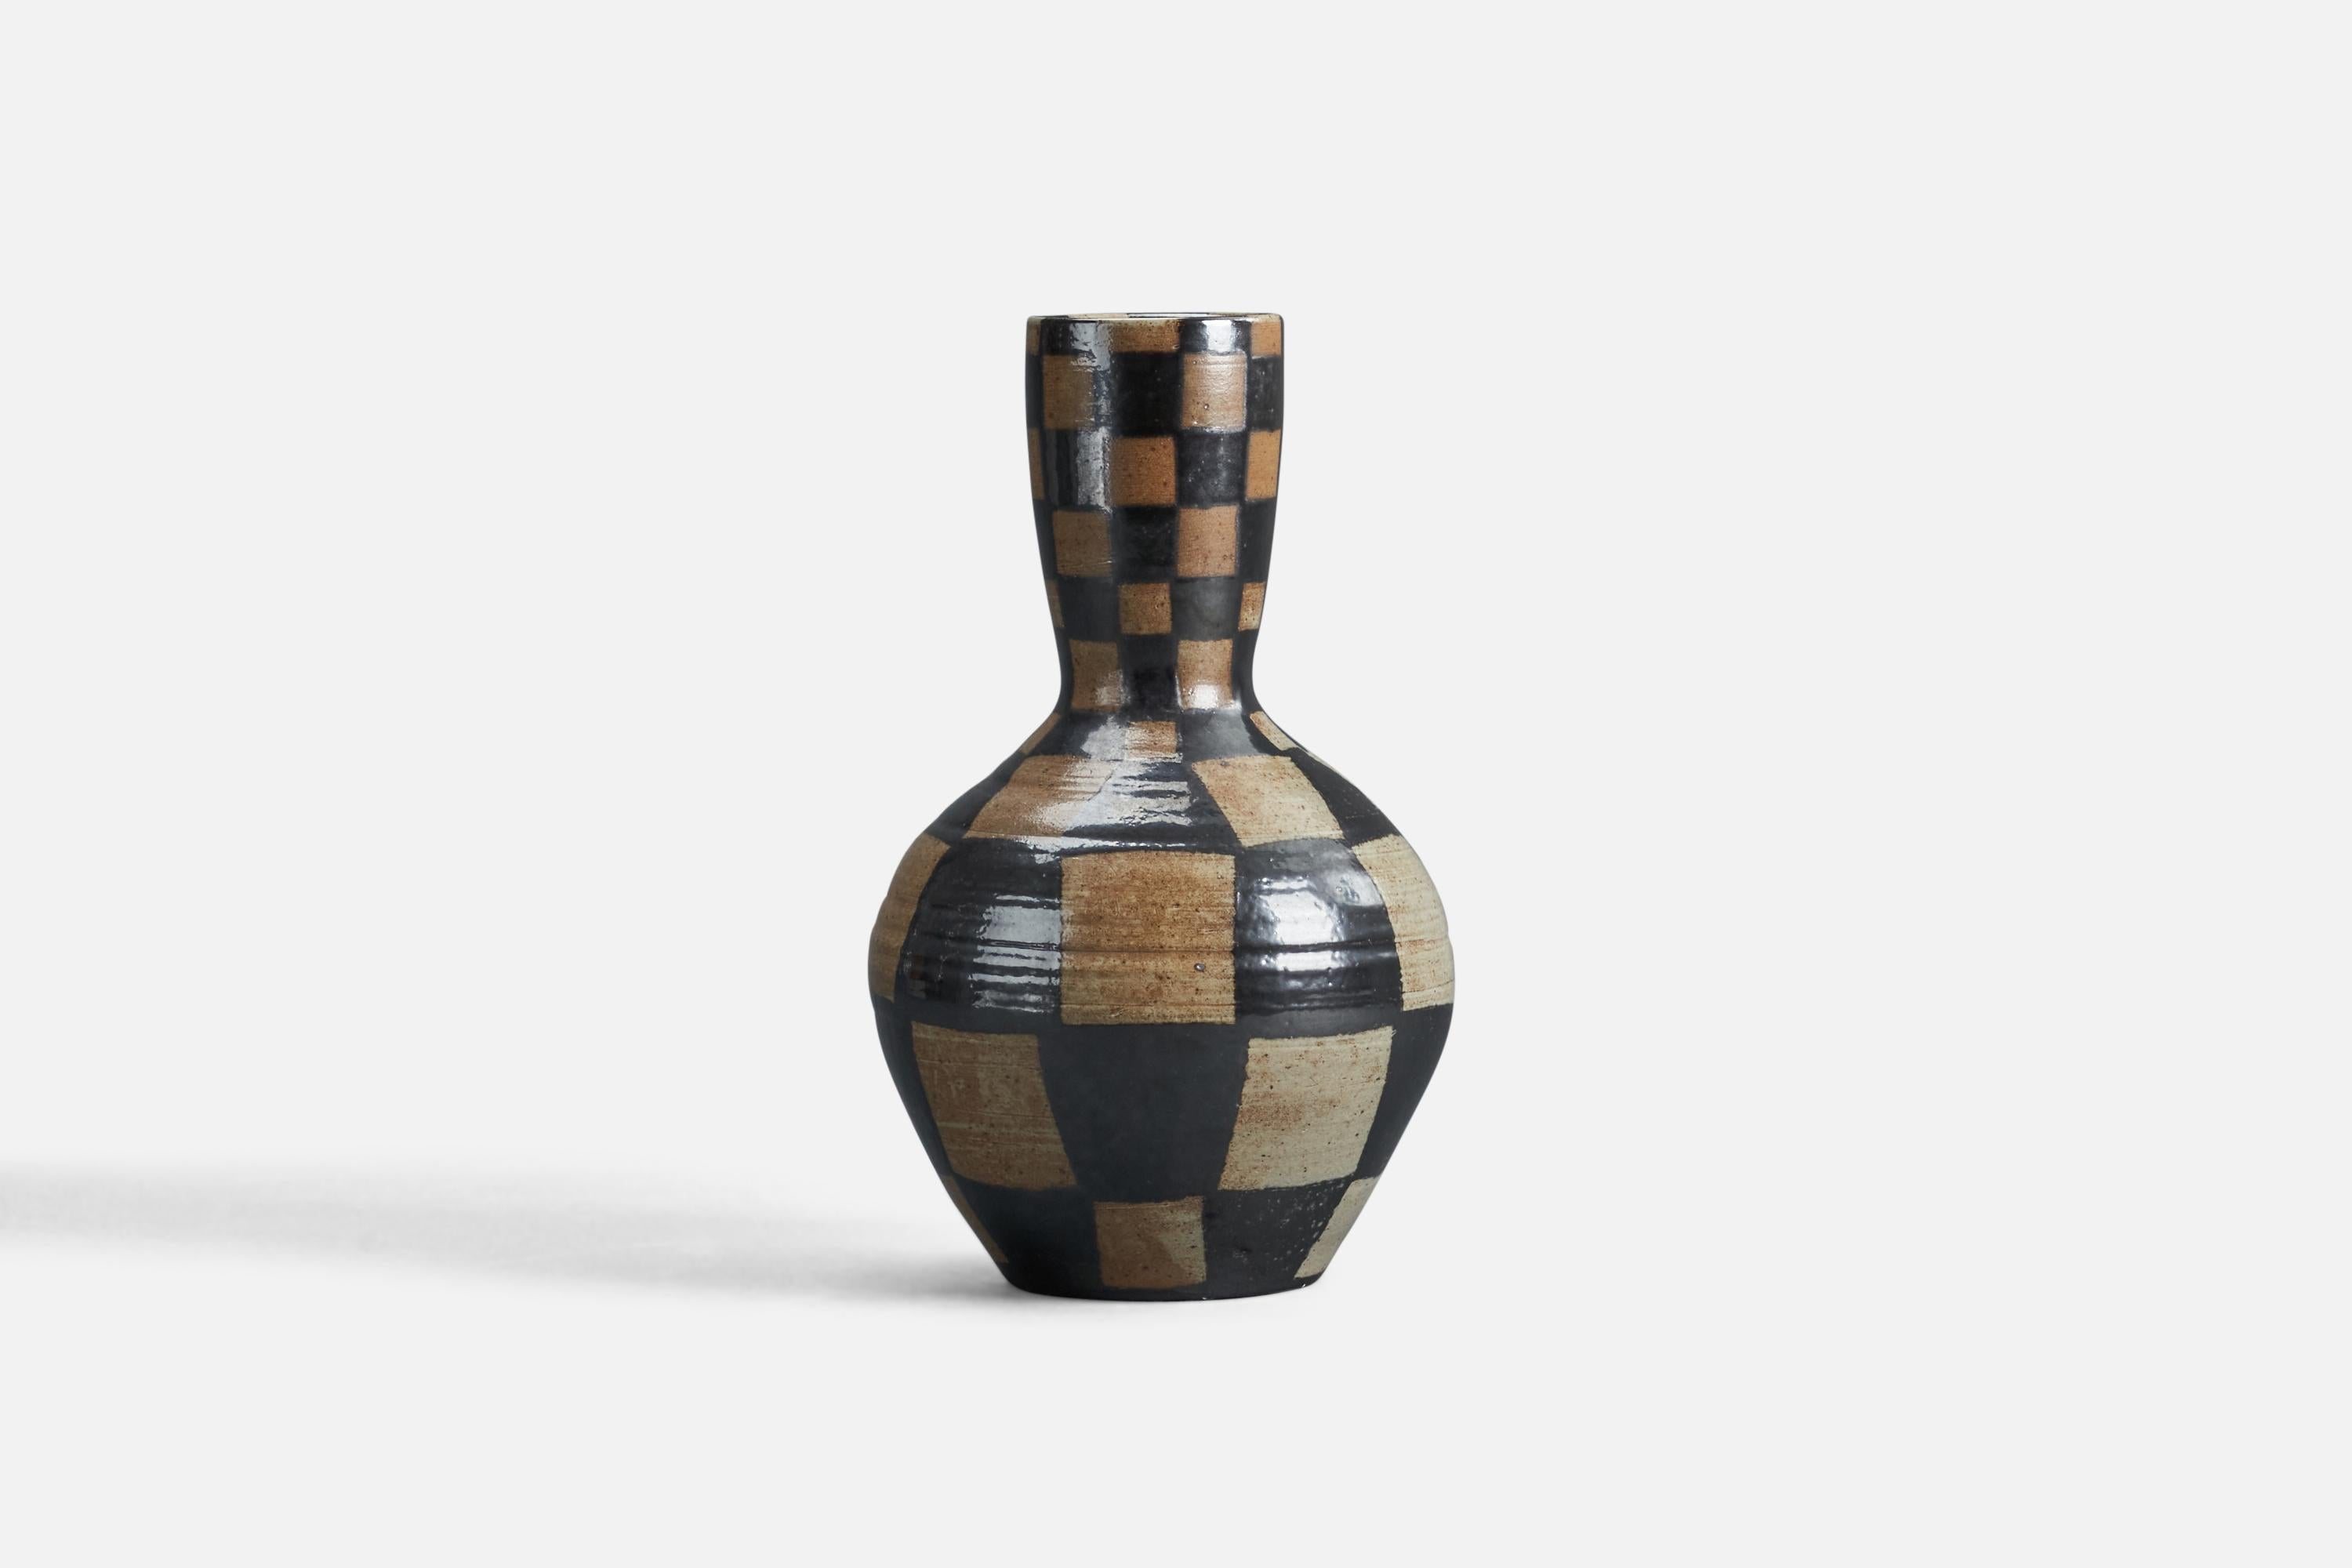 A hand painted ceramic vase designed and produced by Thord, Sweden, circa 1960s.